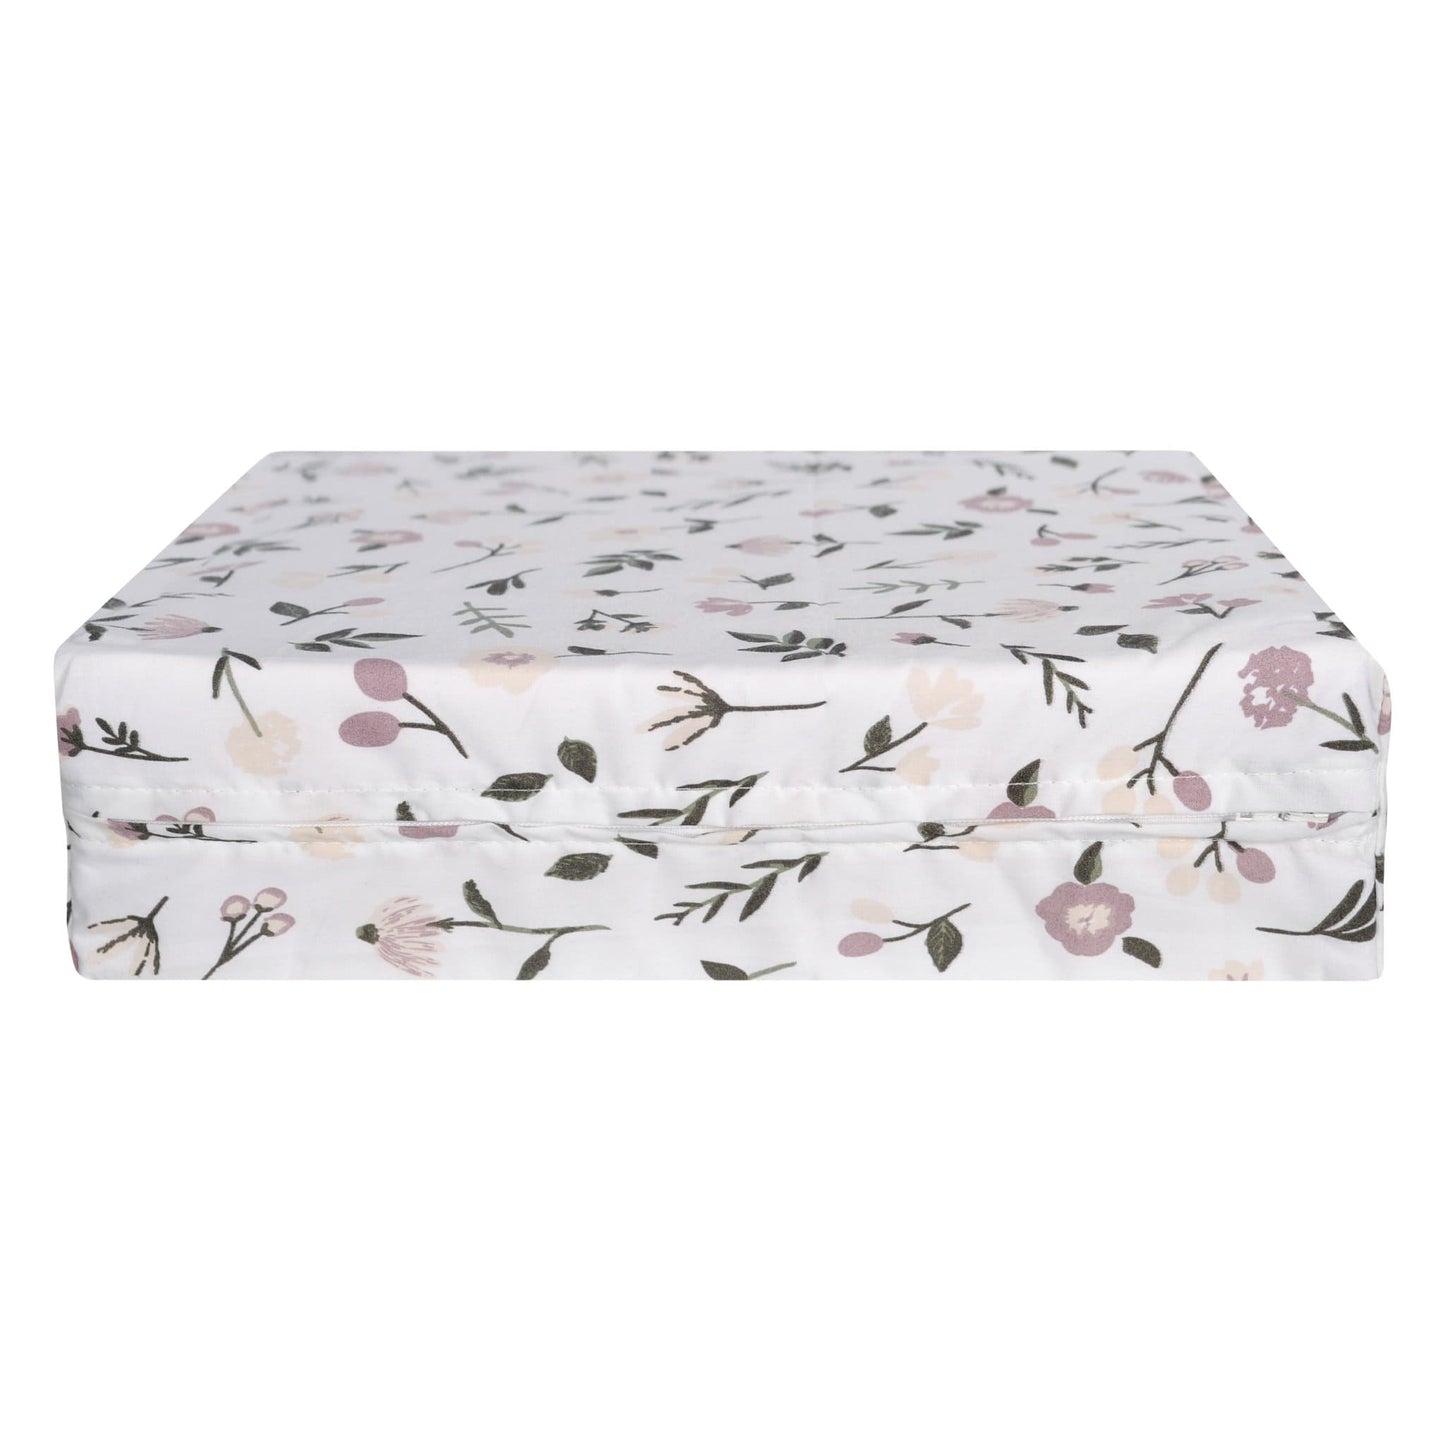 Wedge pillow - floral